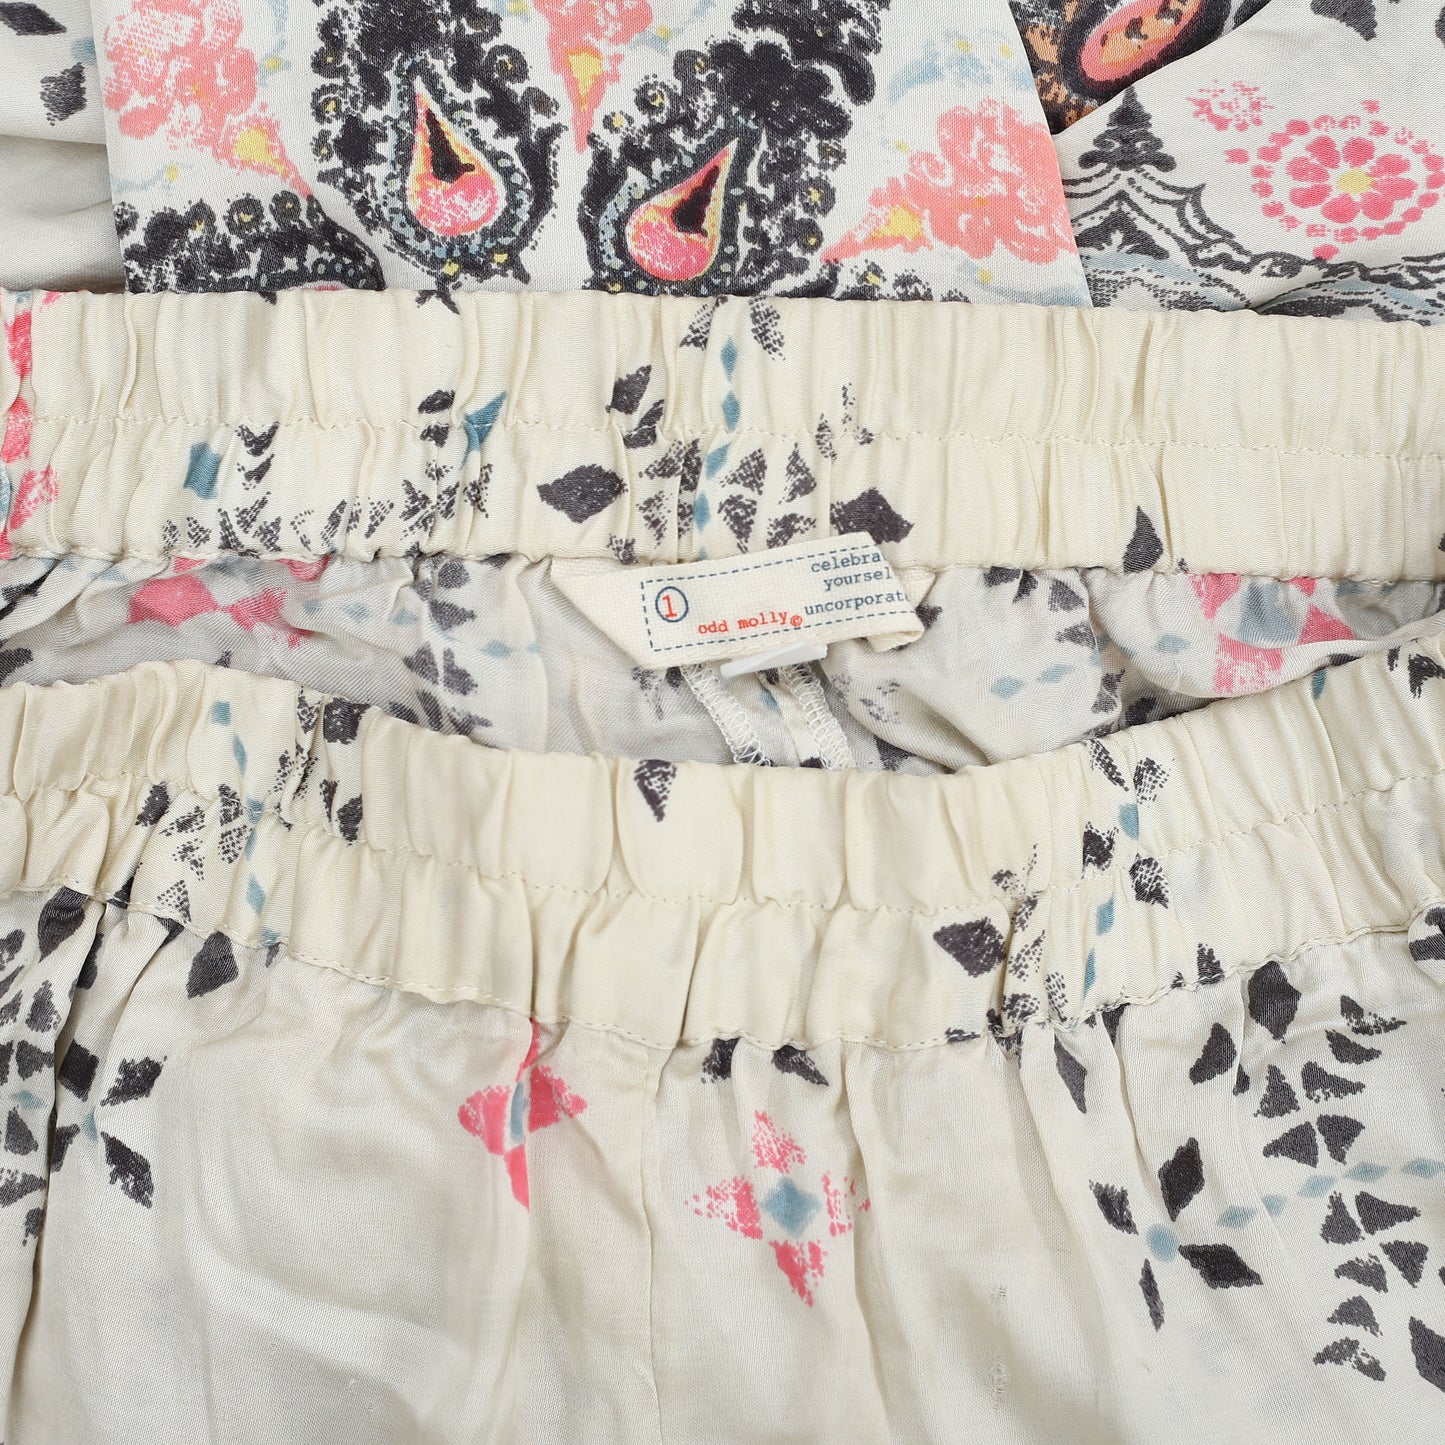 Odd Molly Anthropologie Floral Printed Pants